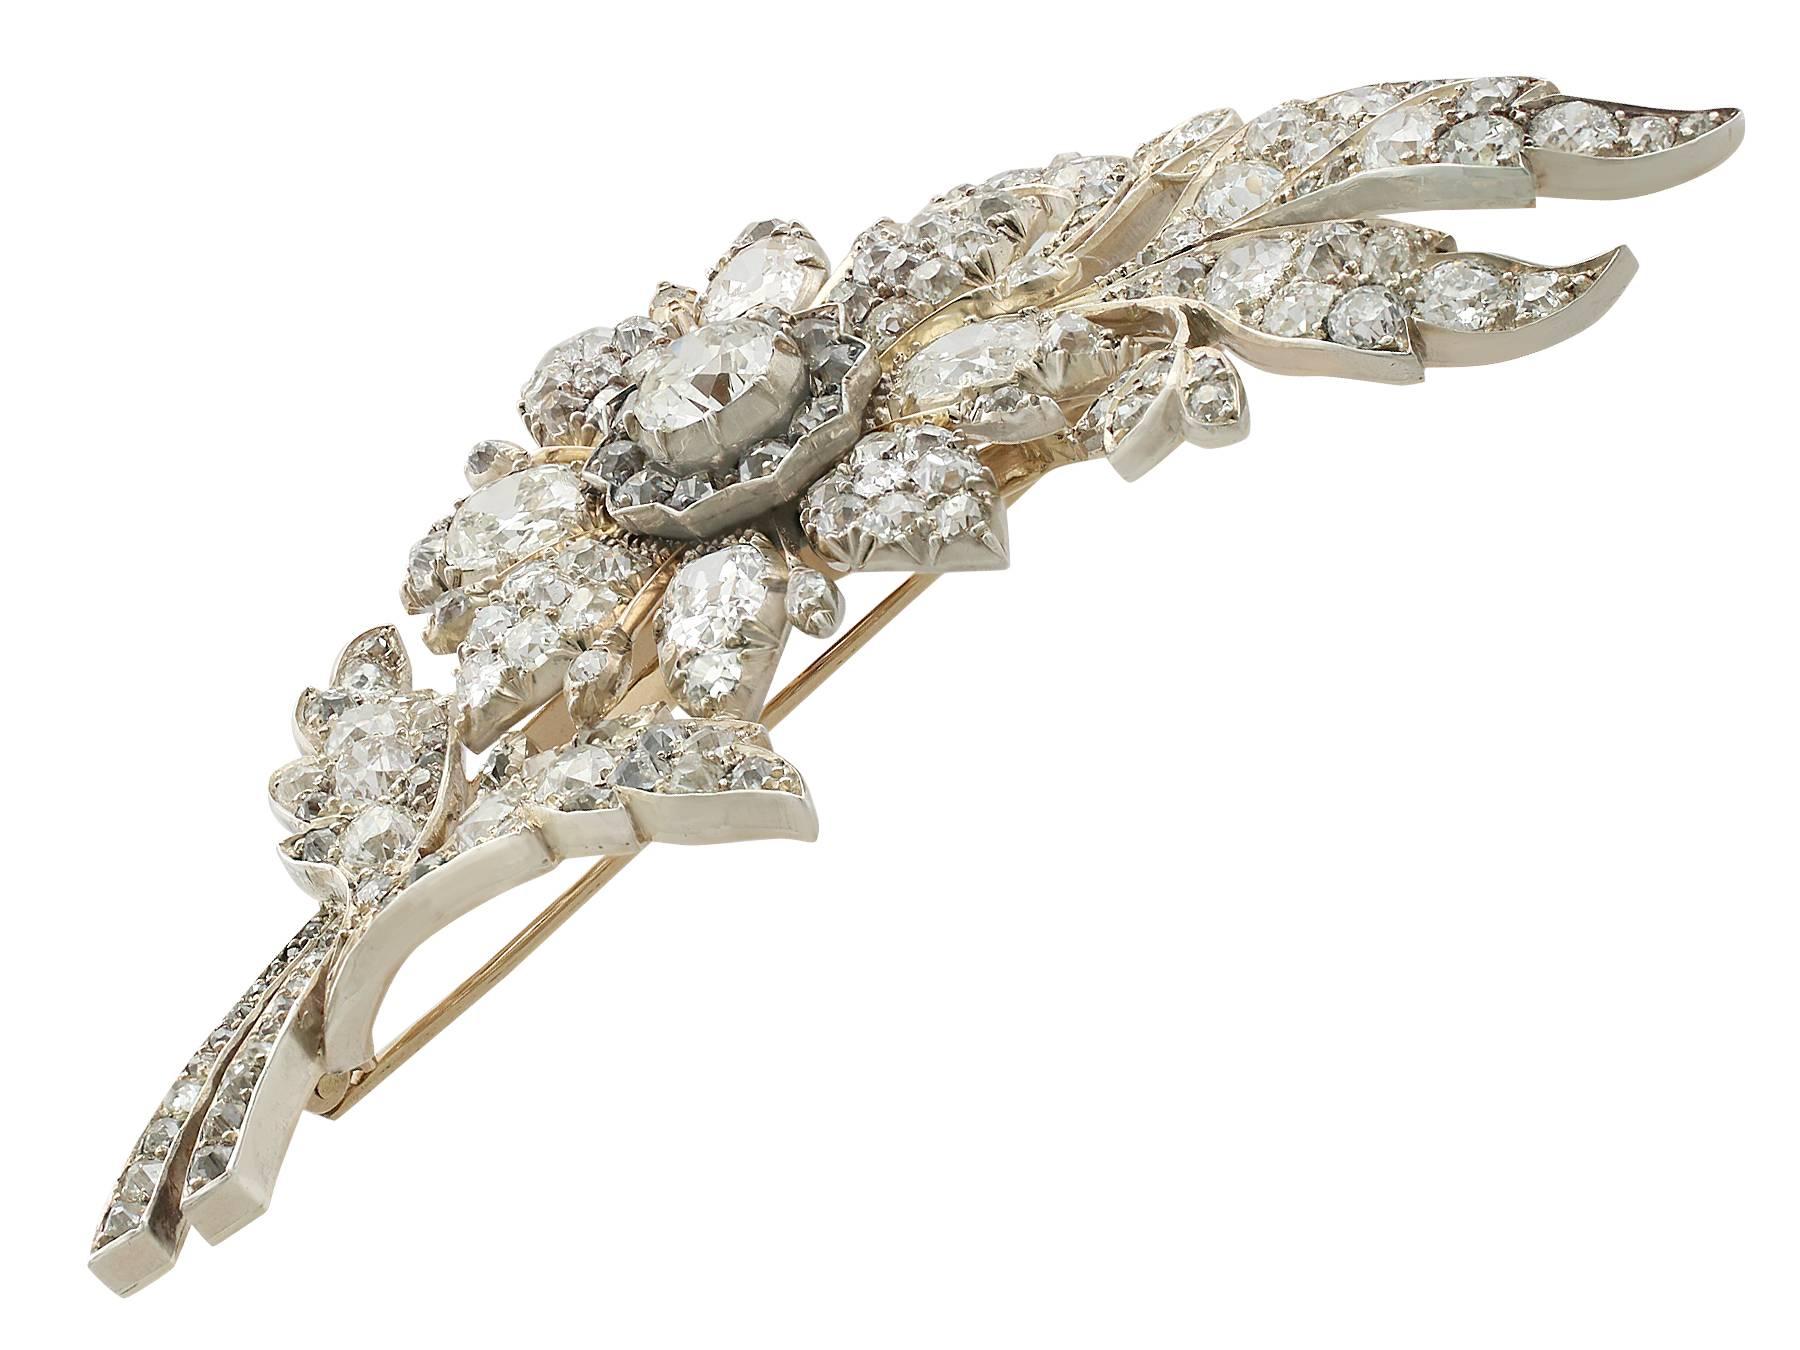 A magnificent and stunning, large antique Victorian 14.68 carat diamond and 9 karat yellow gold, silver set floral brooch; part of our diverse collection of antique jewelry/estate jewelry

This magnificent and stunning, large antique diamond brooch